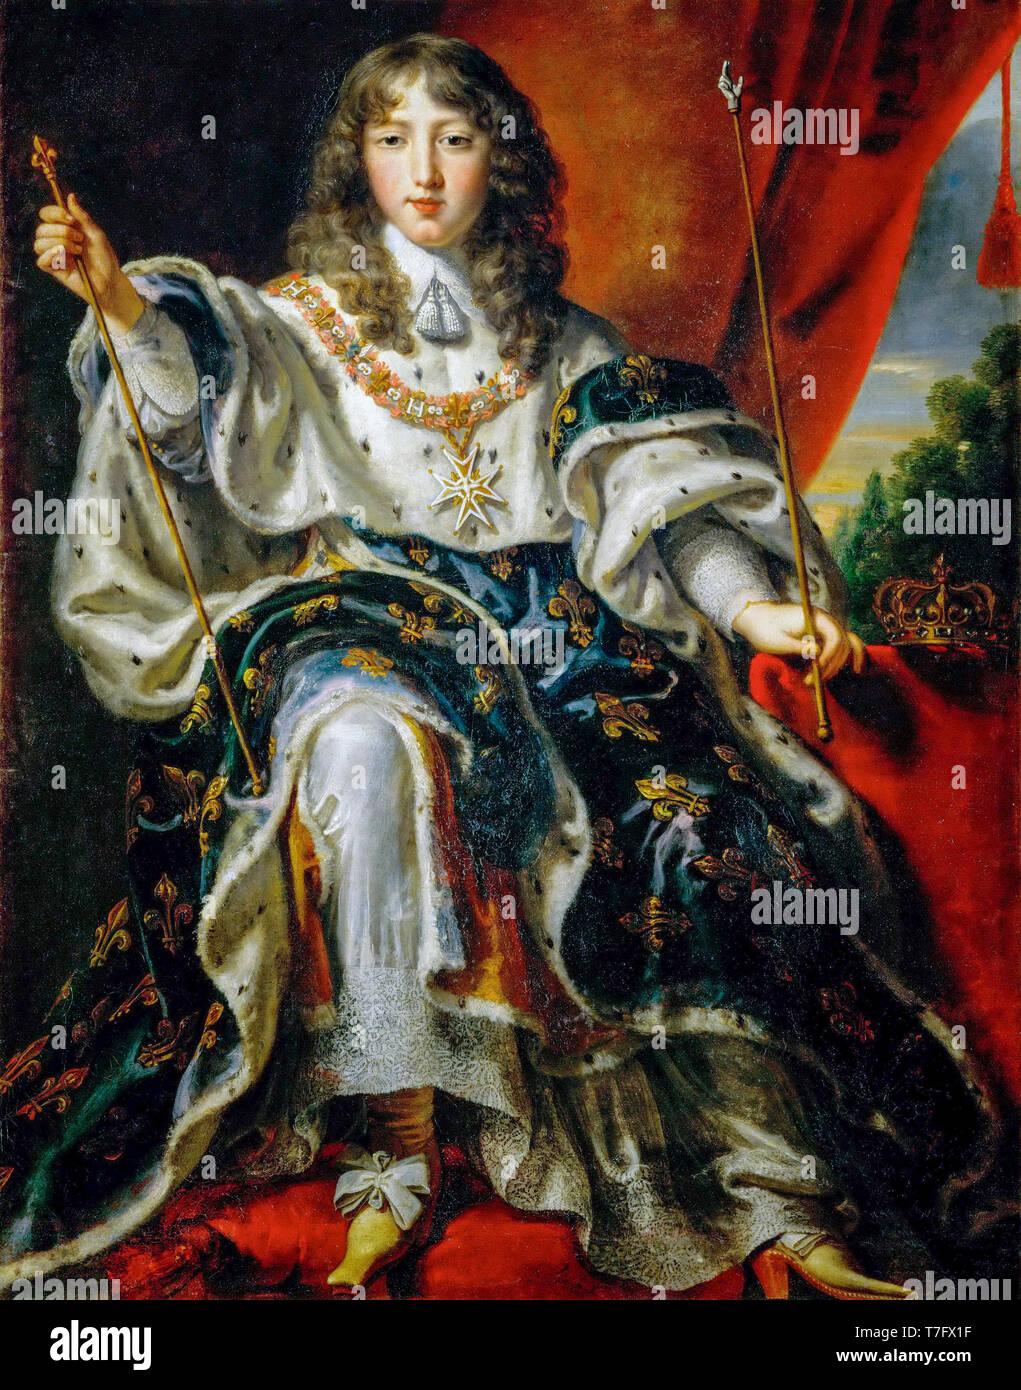 Louis XIV of France as a young boy in Coronation Robes, portrait by Justus van Egmont, 17th Century Stock Photo